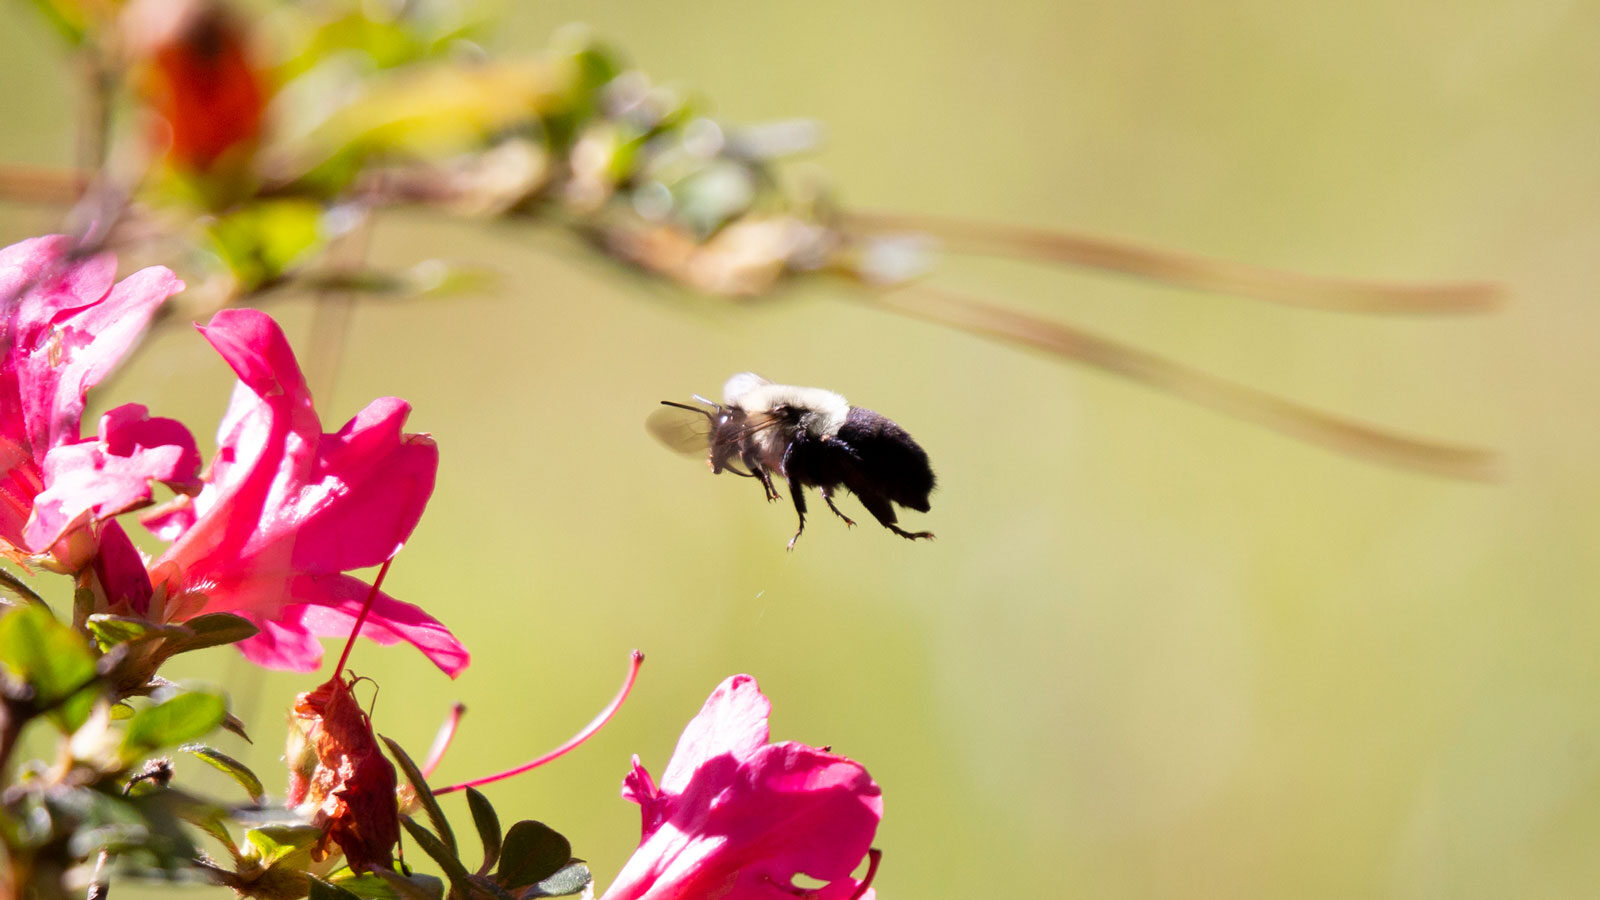 Common eastern bumble bee flying toward pink flowers